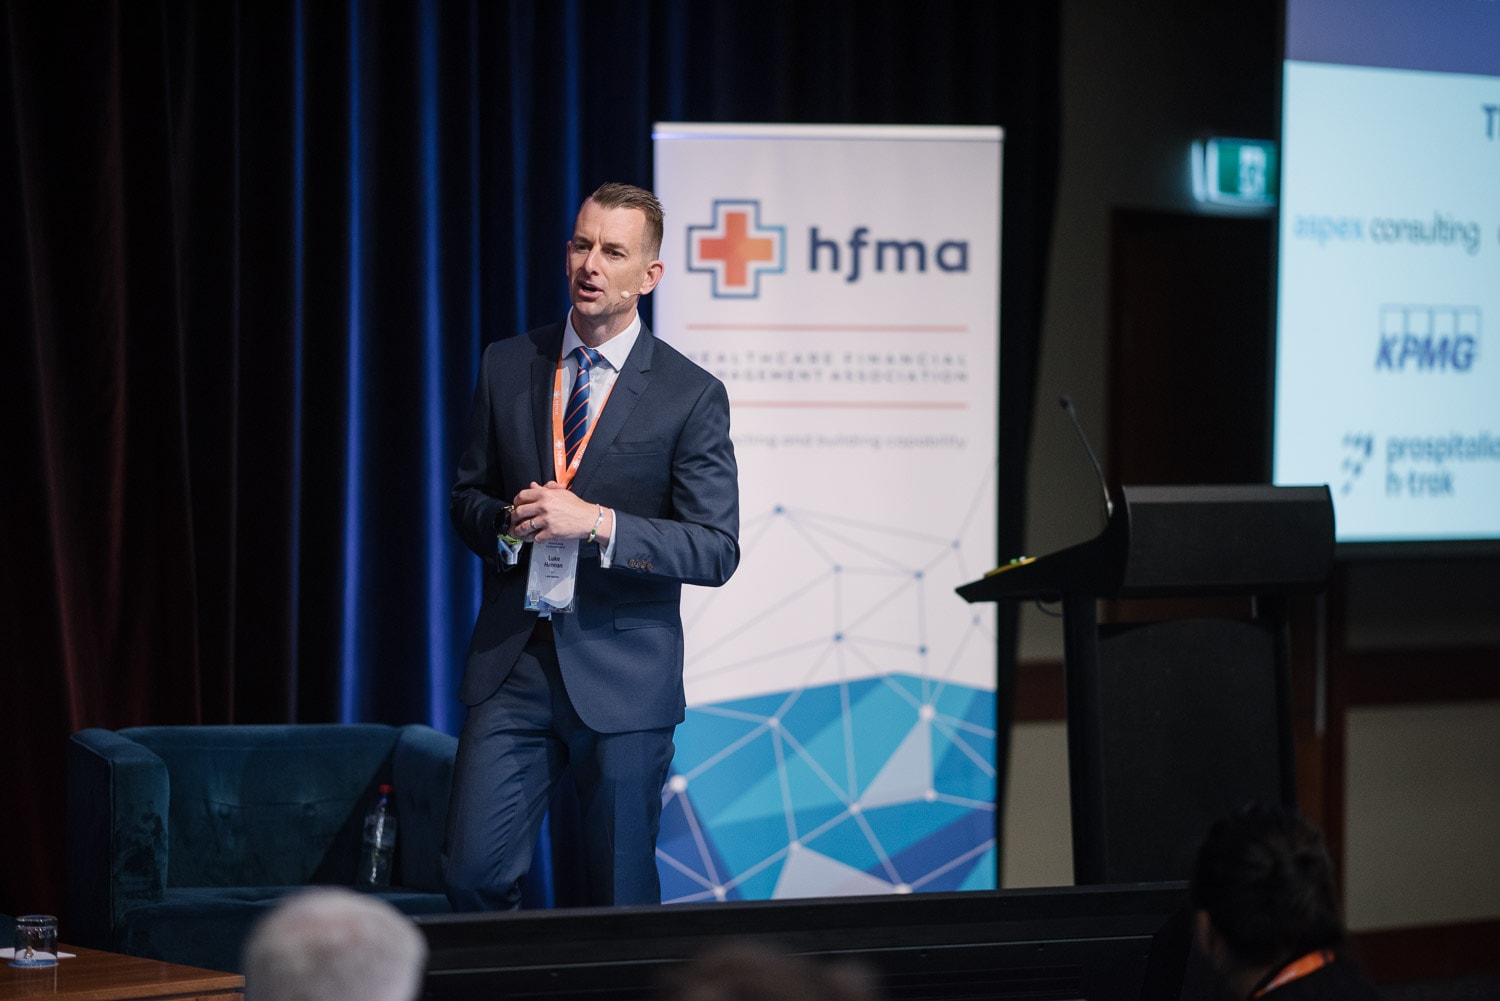 Luke Hannan MCing at the HFMA conference in Lorne 2023